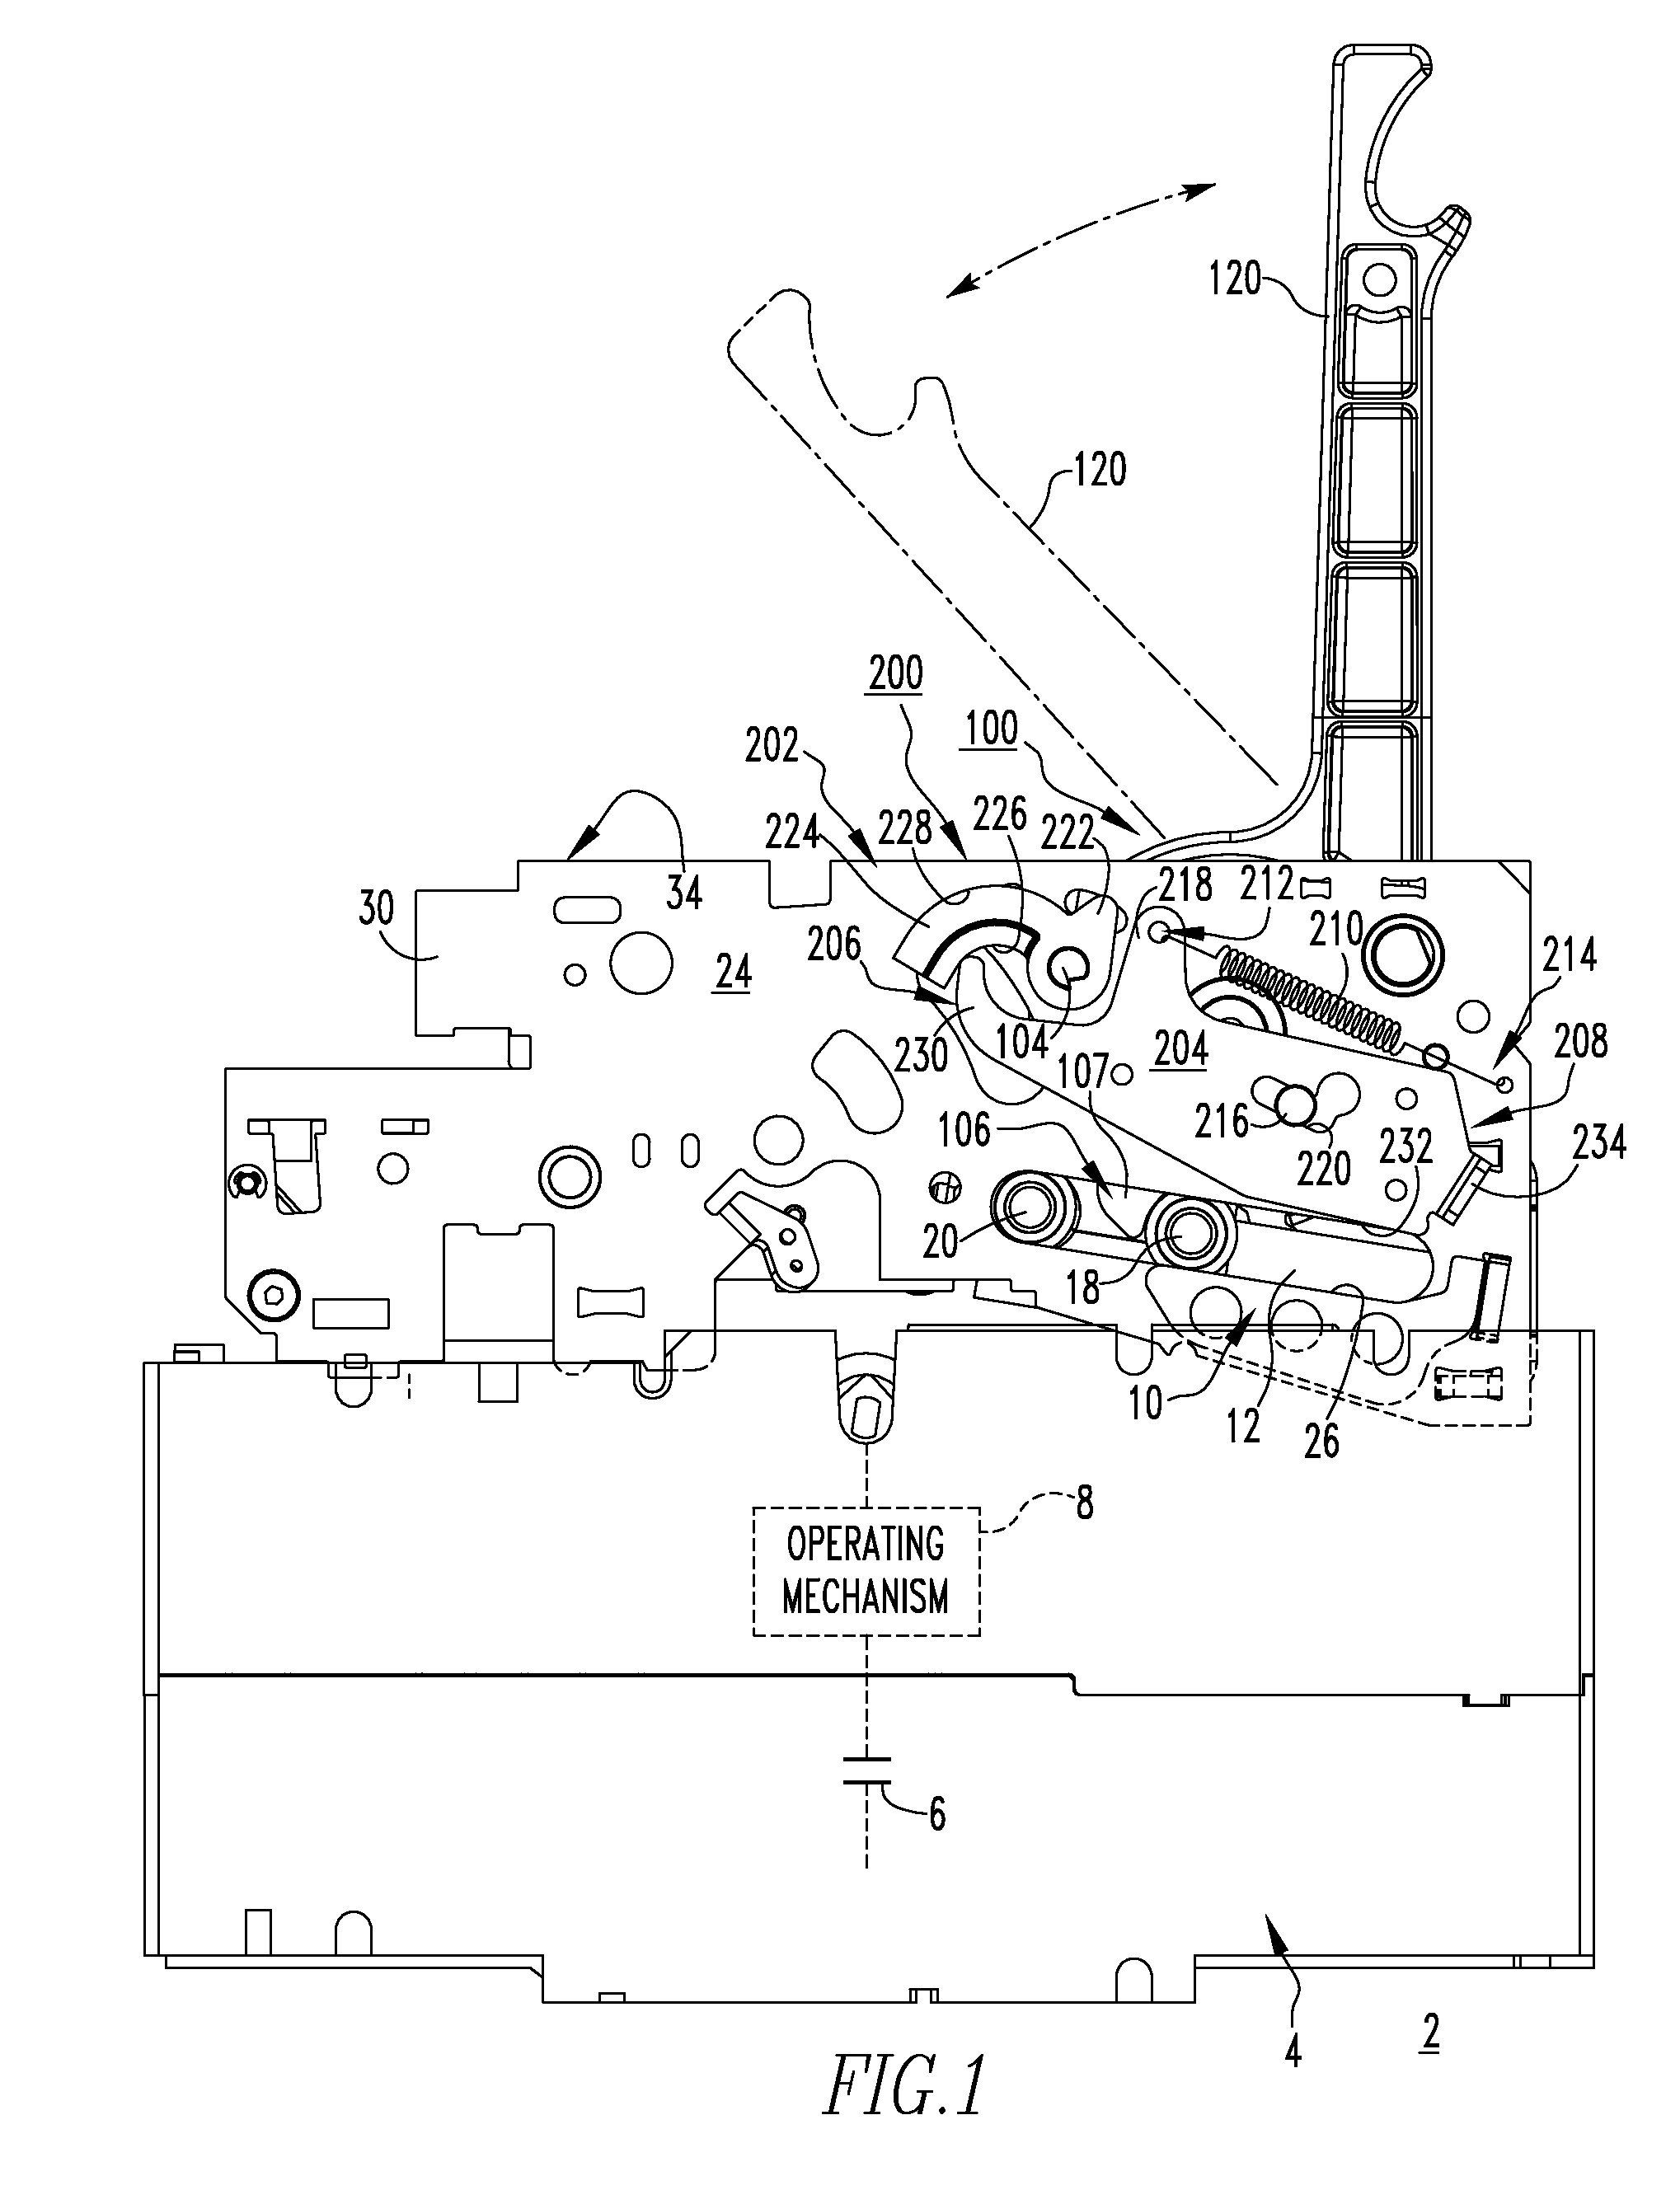 Electrical switching apparatus, and charging assembly and interlock assembly therefor